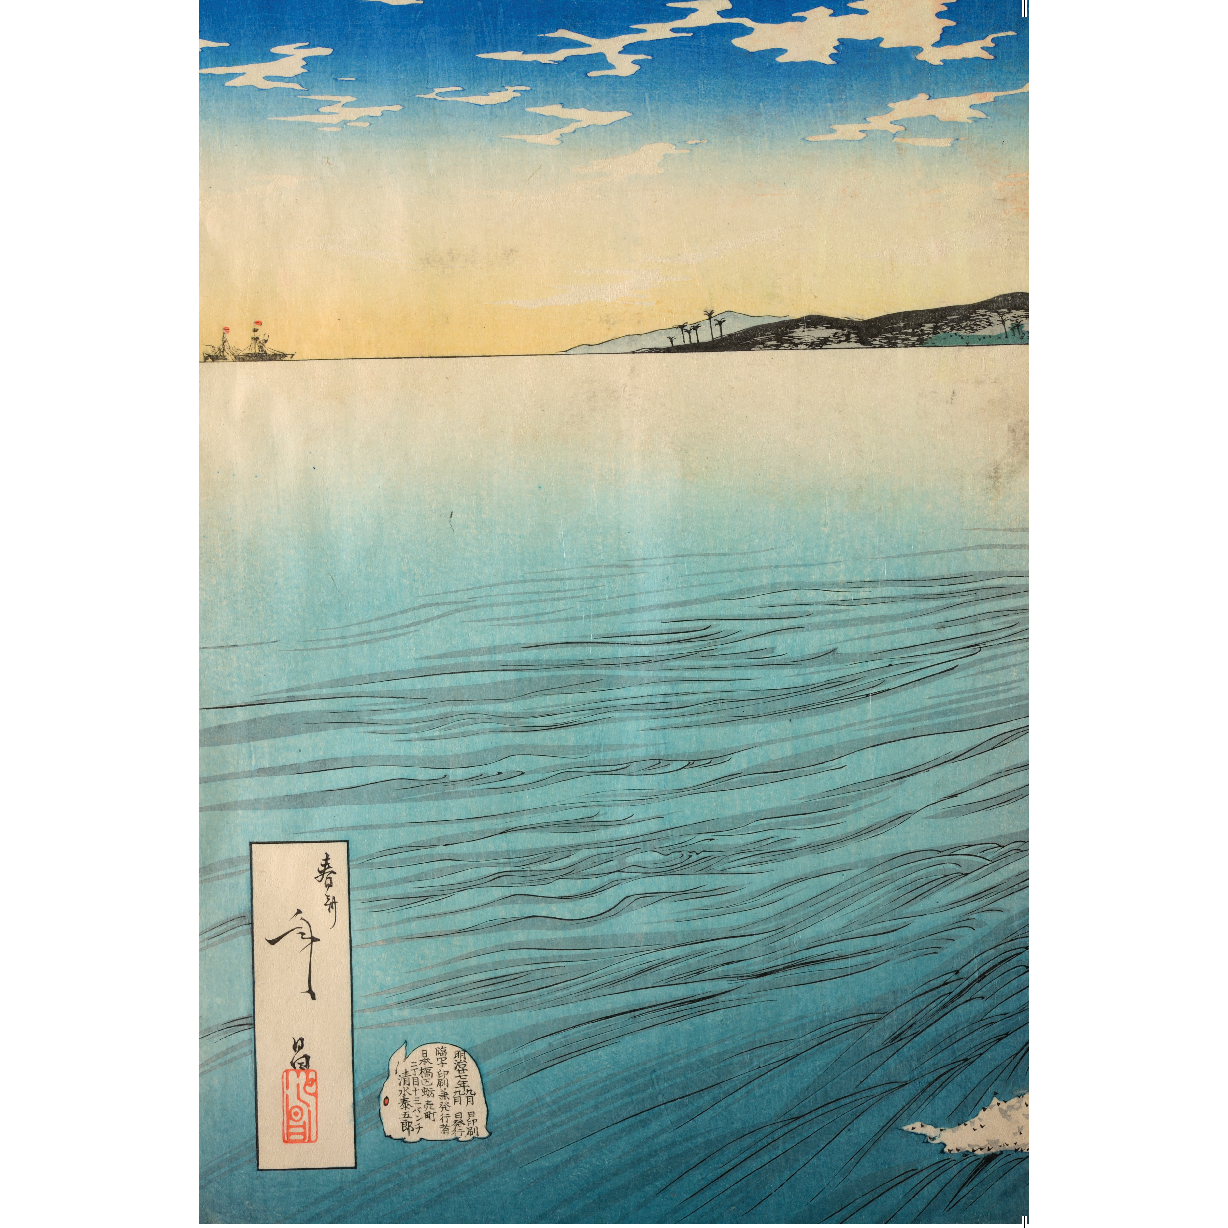 Greeting card - portrait format. Japanese woodblock illustration of a pale blue sea under a blue sky, with distant mountains. From the collection of Cambridge University Library, brought to you by CuratingCambridge.com